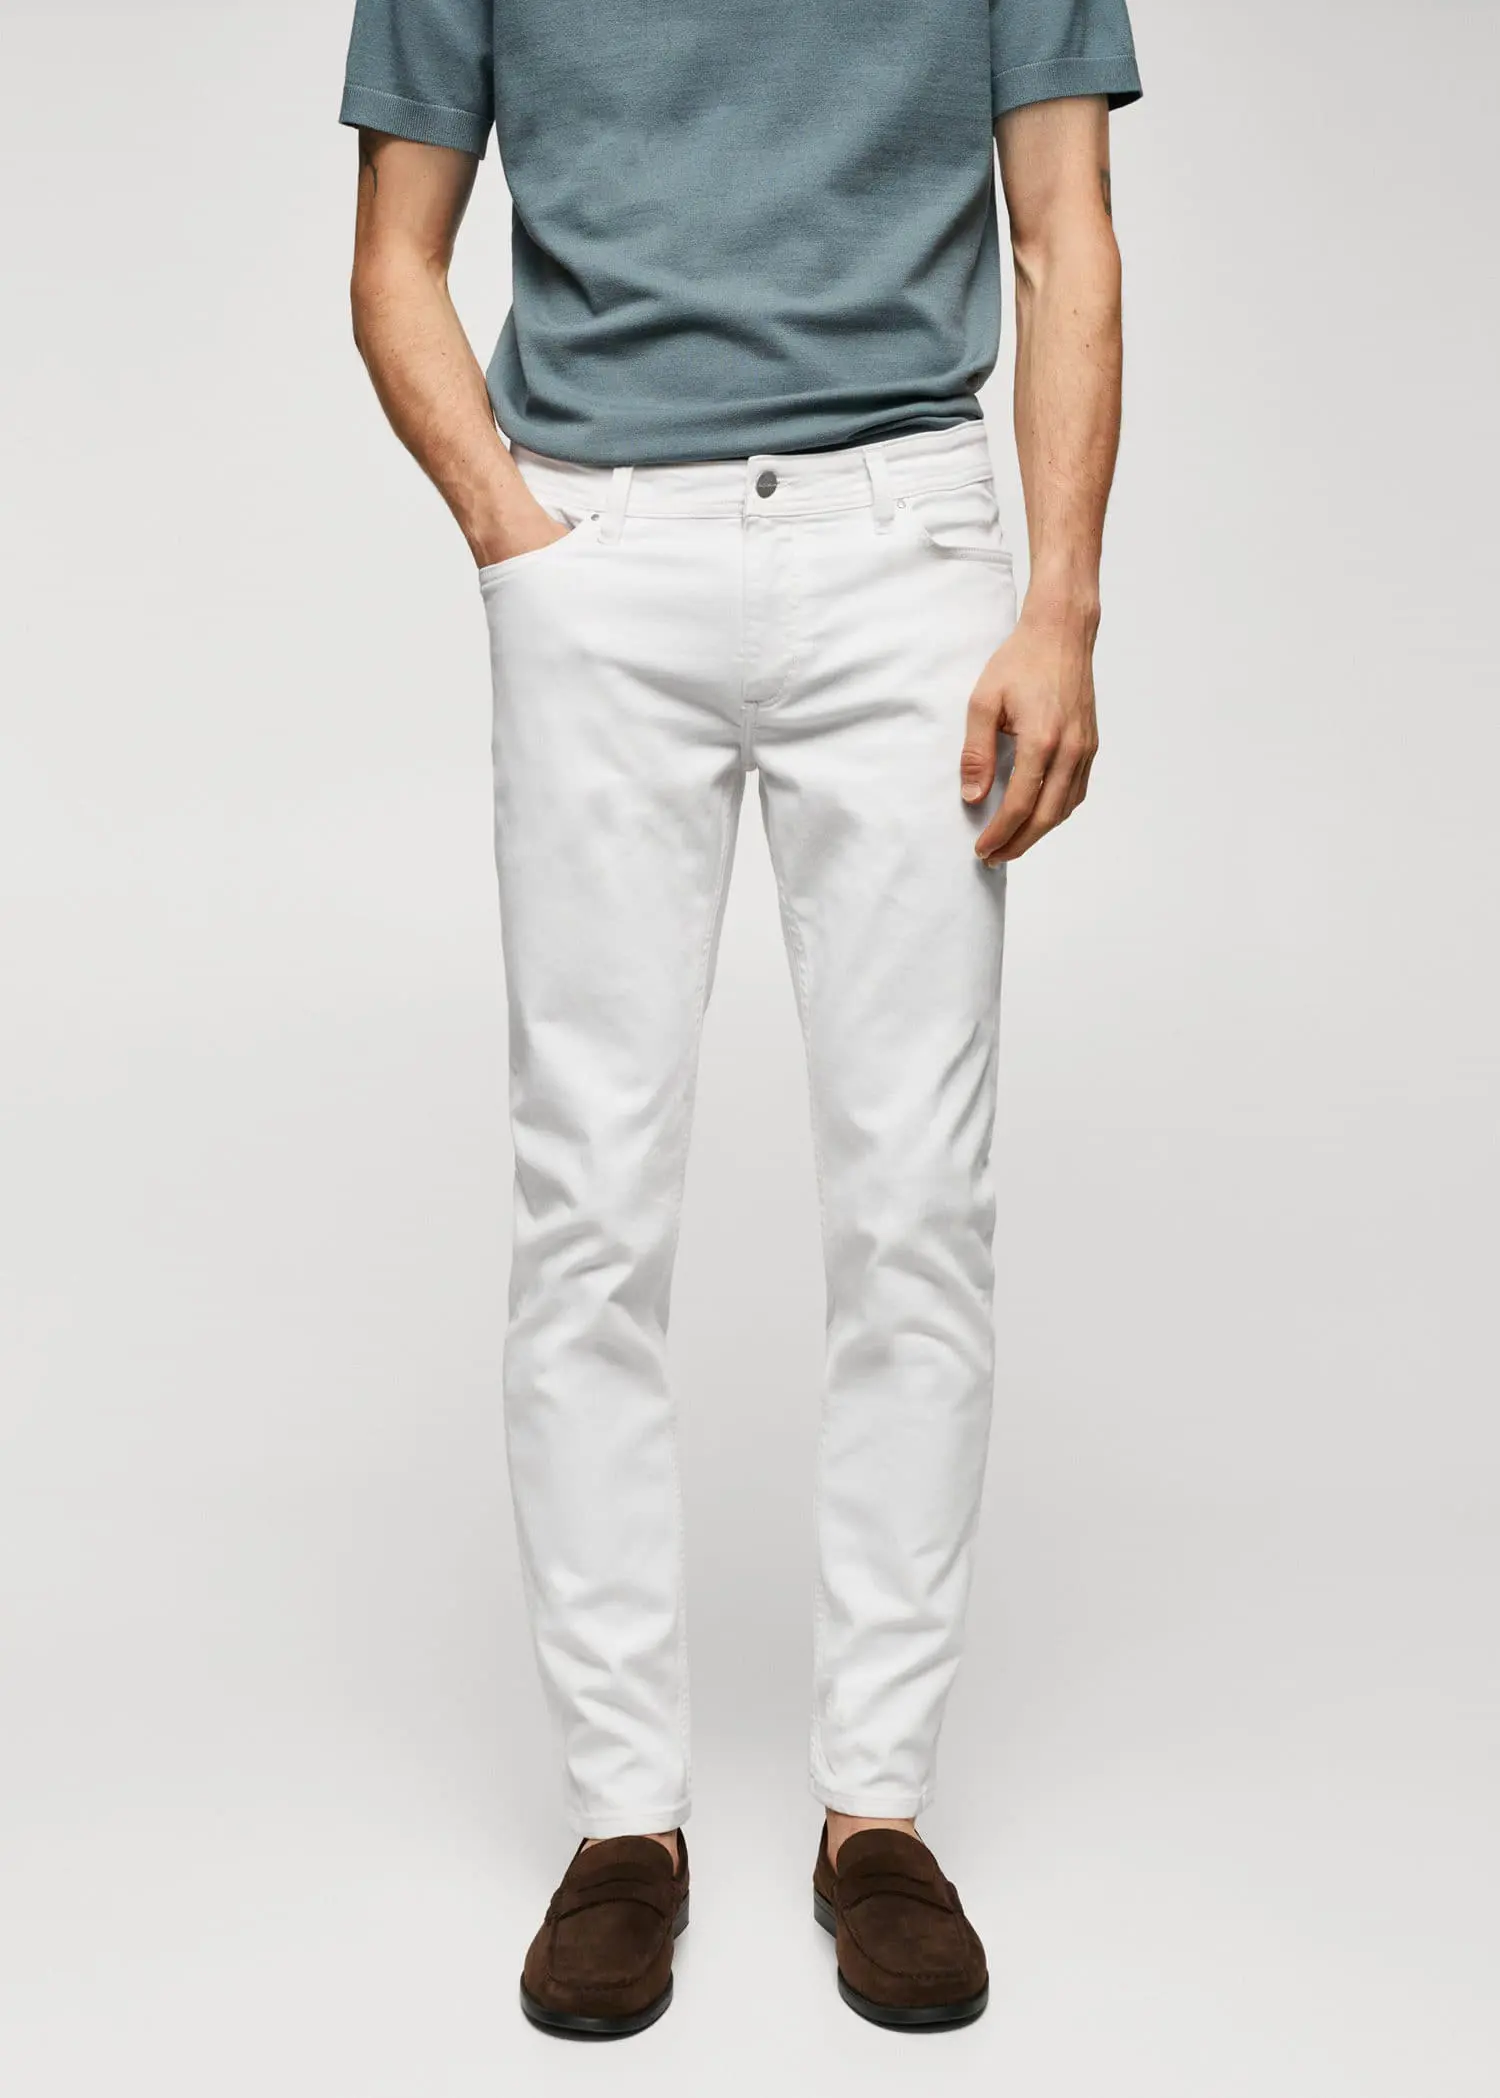 Mango Jan slim-fit jeans. a man in white jeans and a blue shirt. 